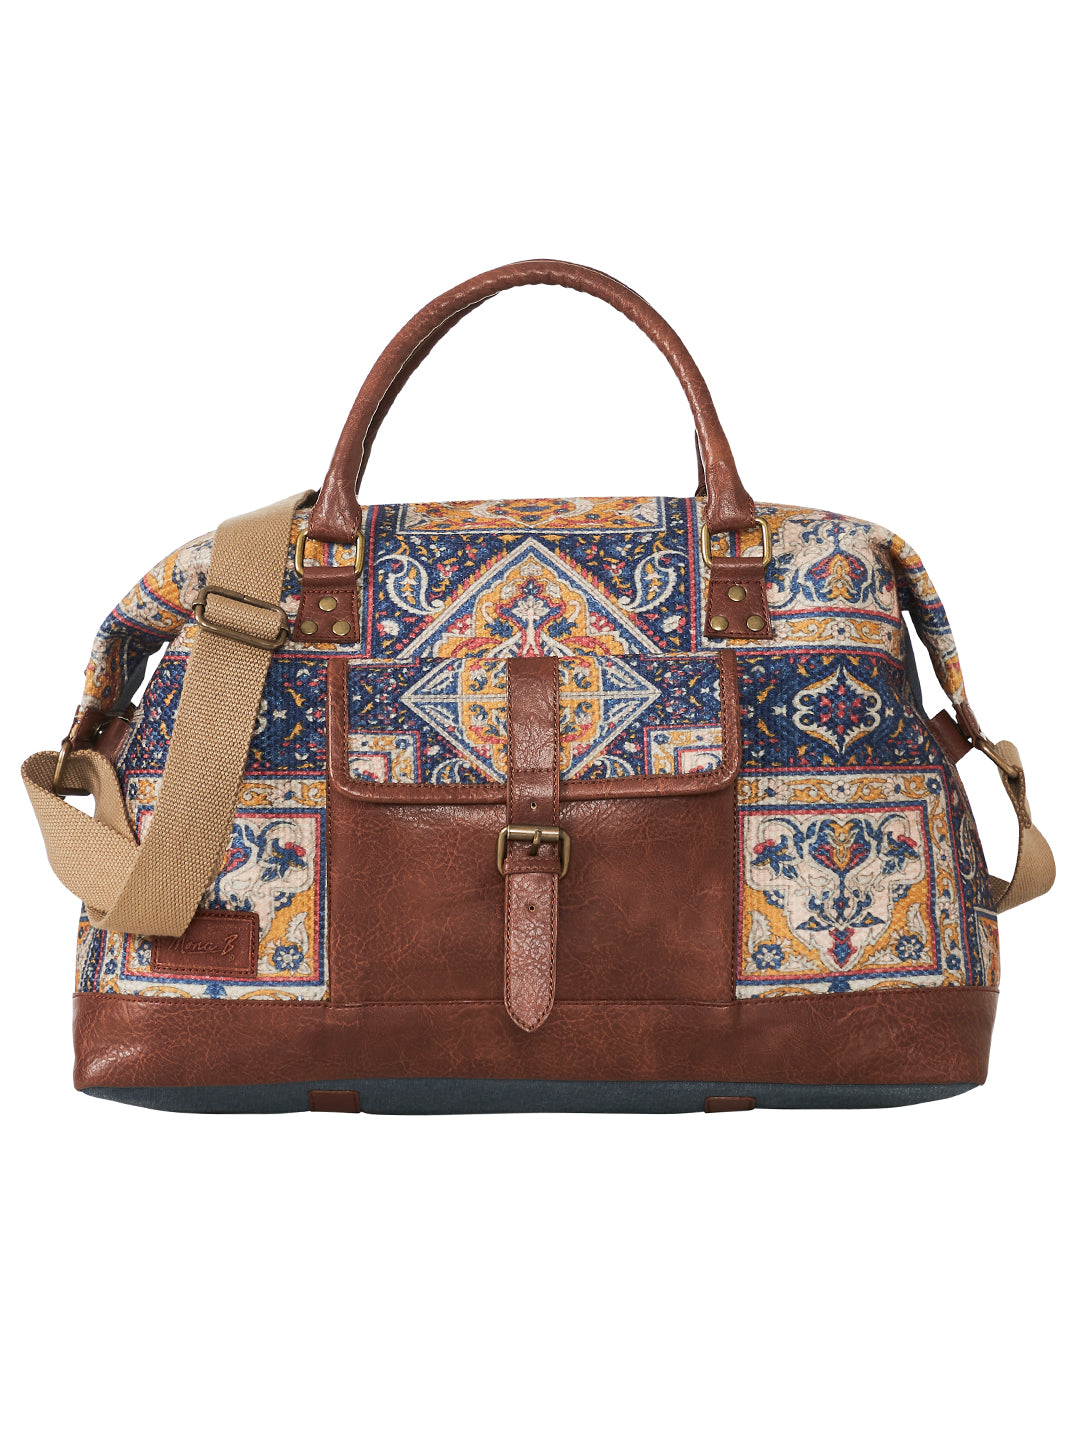 Mona B Large Kilim Inspired Duffel Gym Travel and Sports Bag with Outside Pocket and Stylish Design for Women: Chocolate